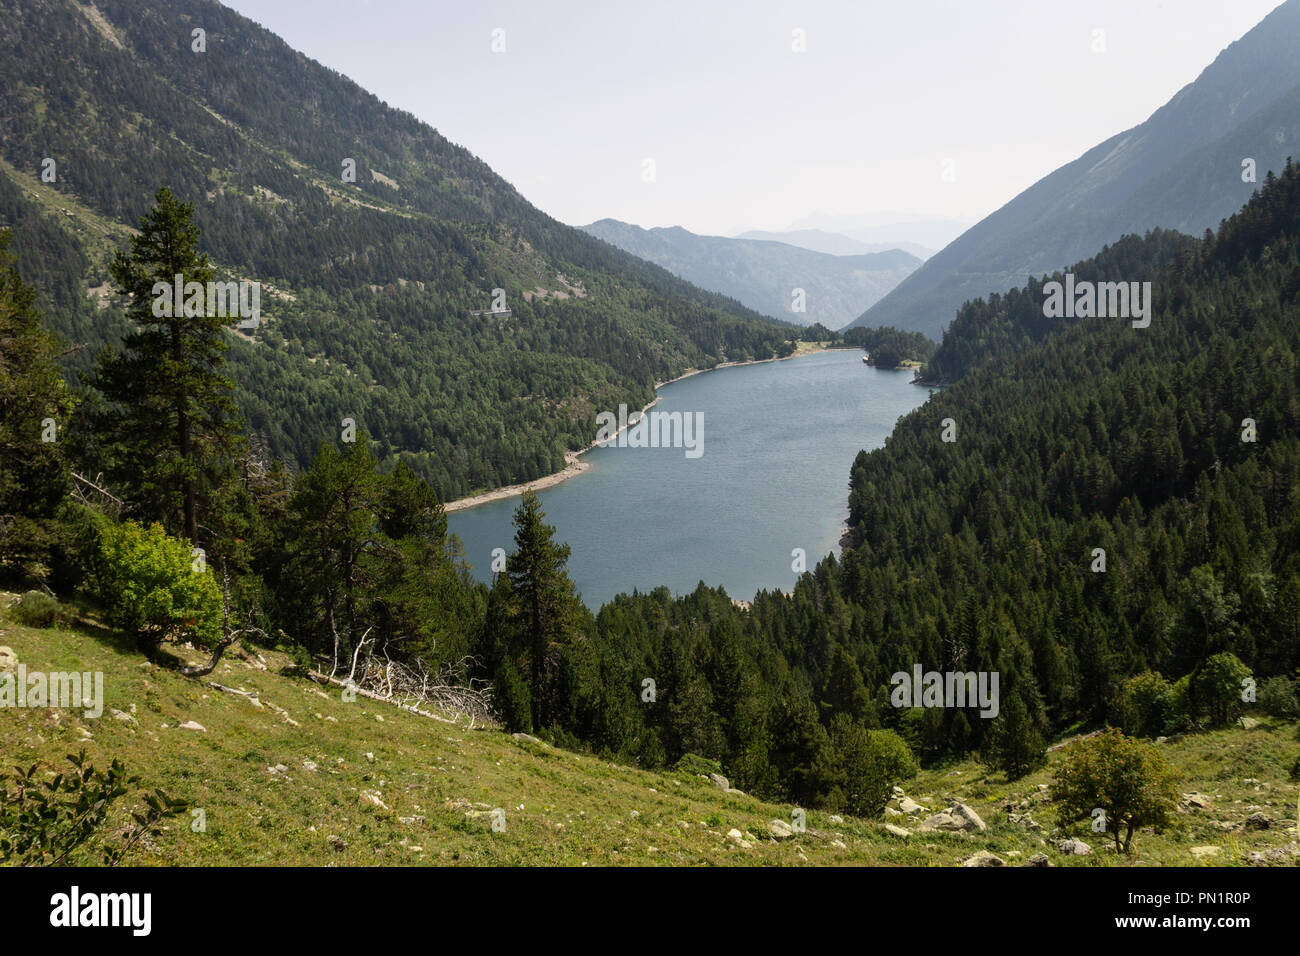 A lake is surrounded by a dense forest in the hillside. Stock Photo